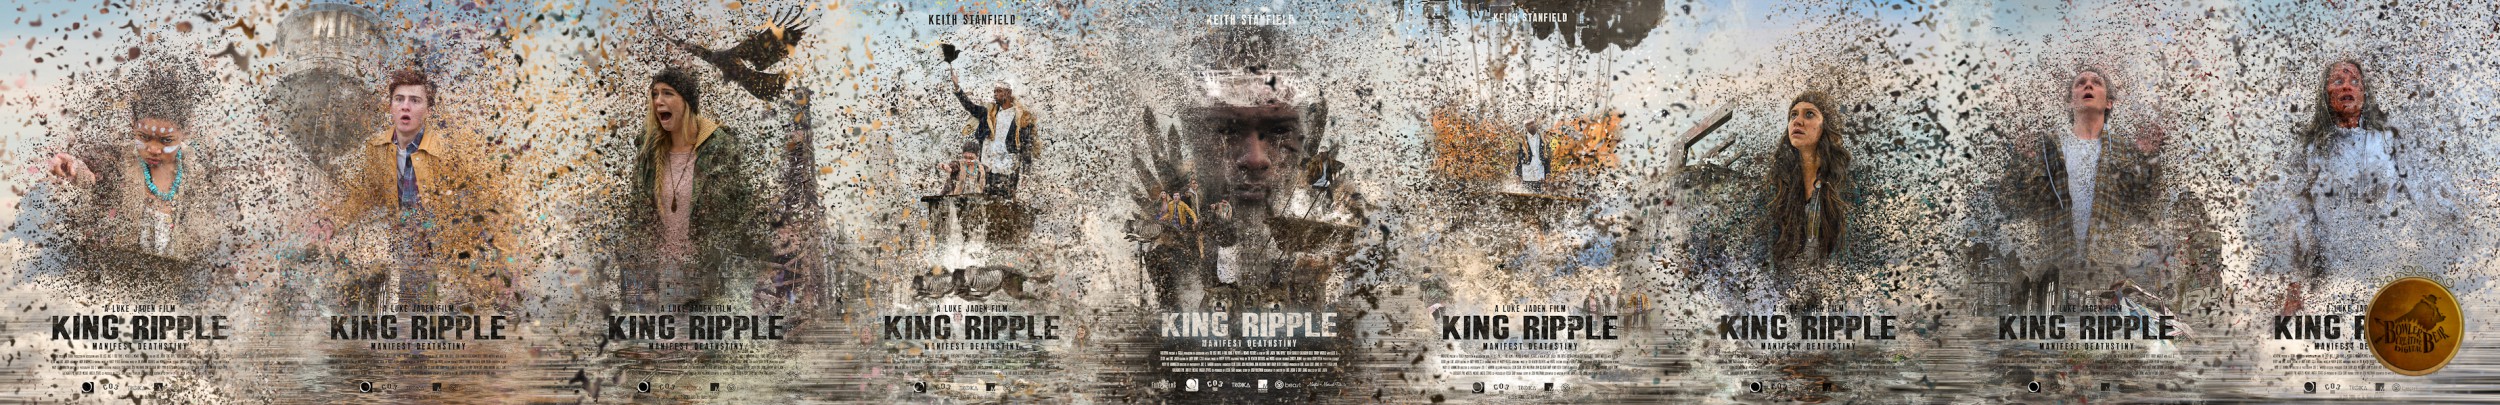 Extra Large Movie Poster Image for King Ripple